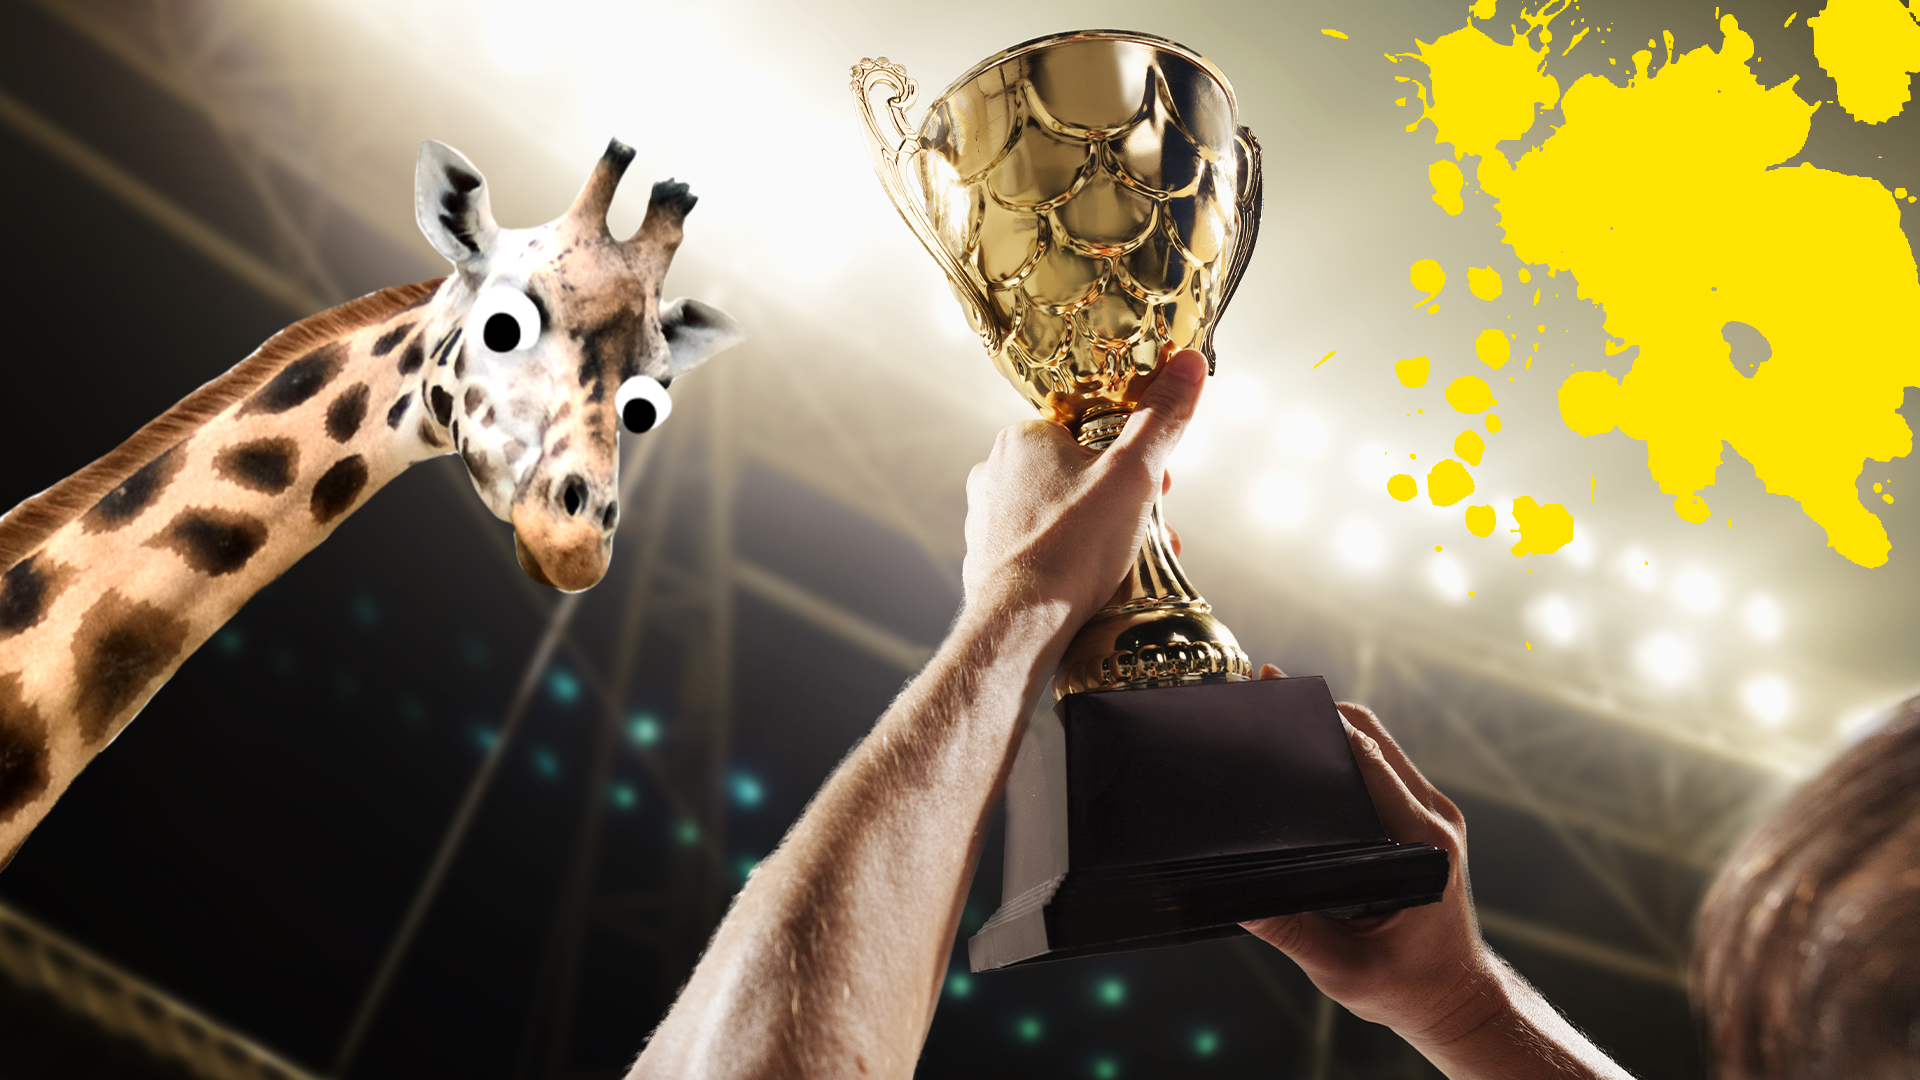 Hand holding trophy in stadium with yellow splats and goofy giraffe